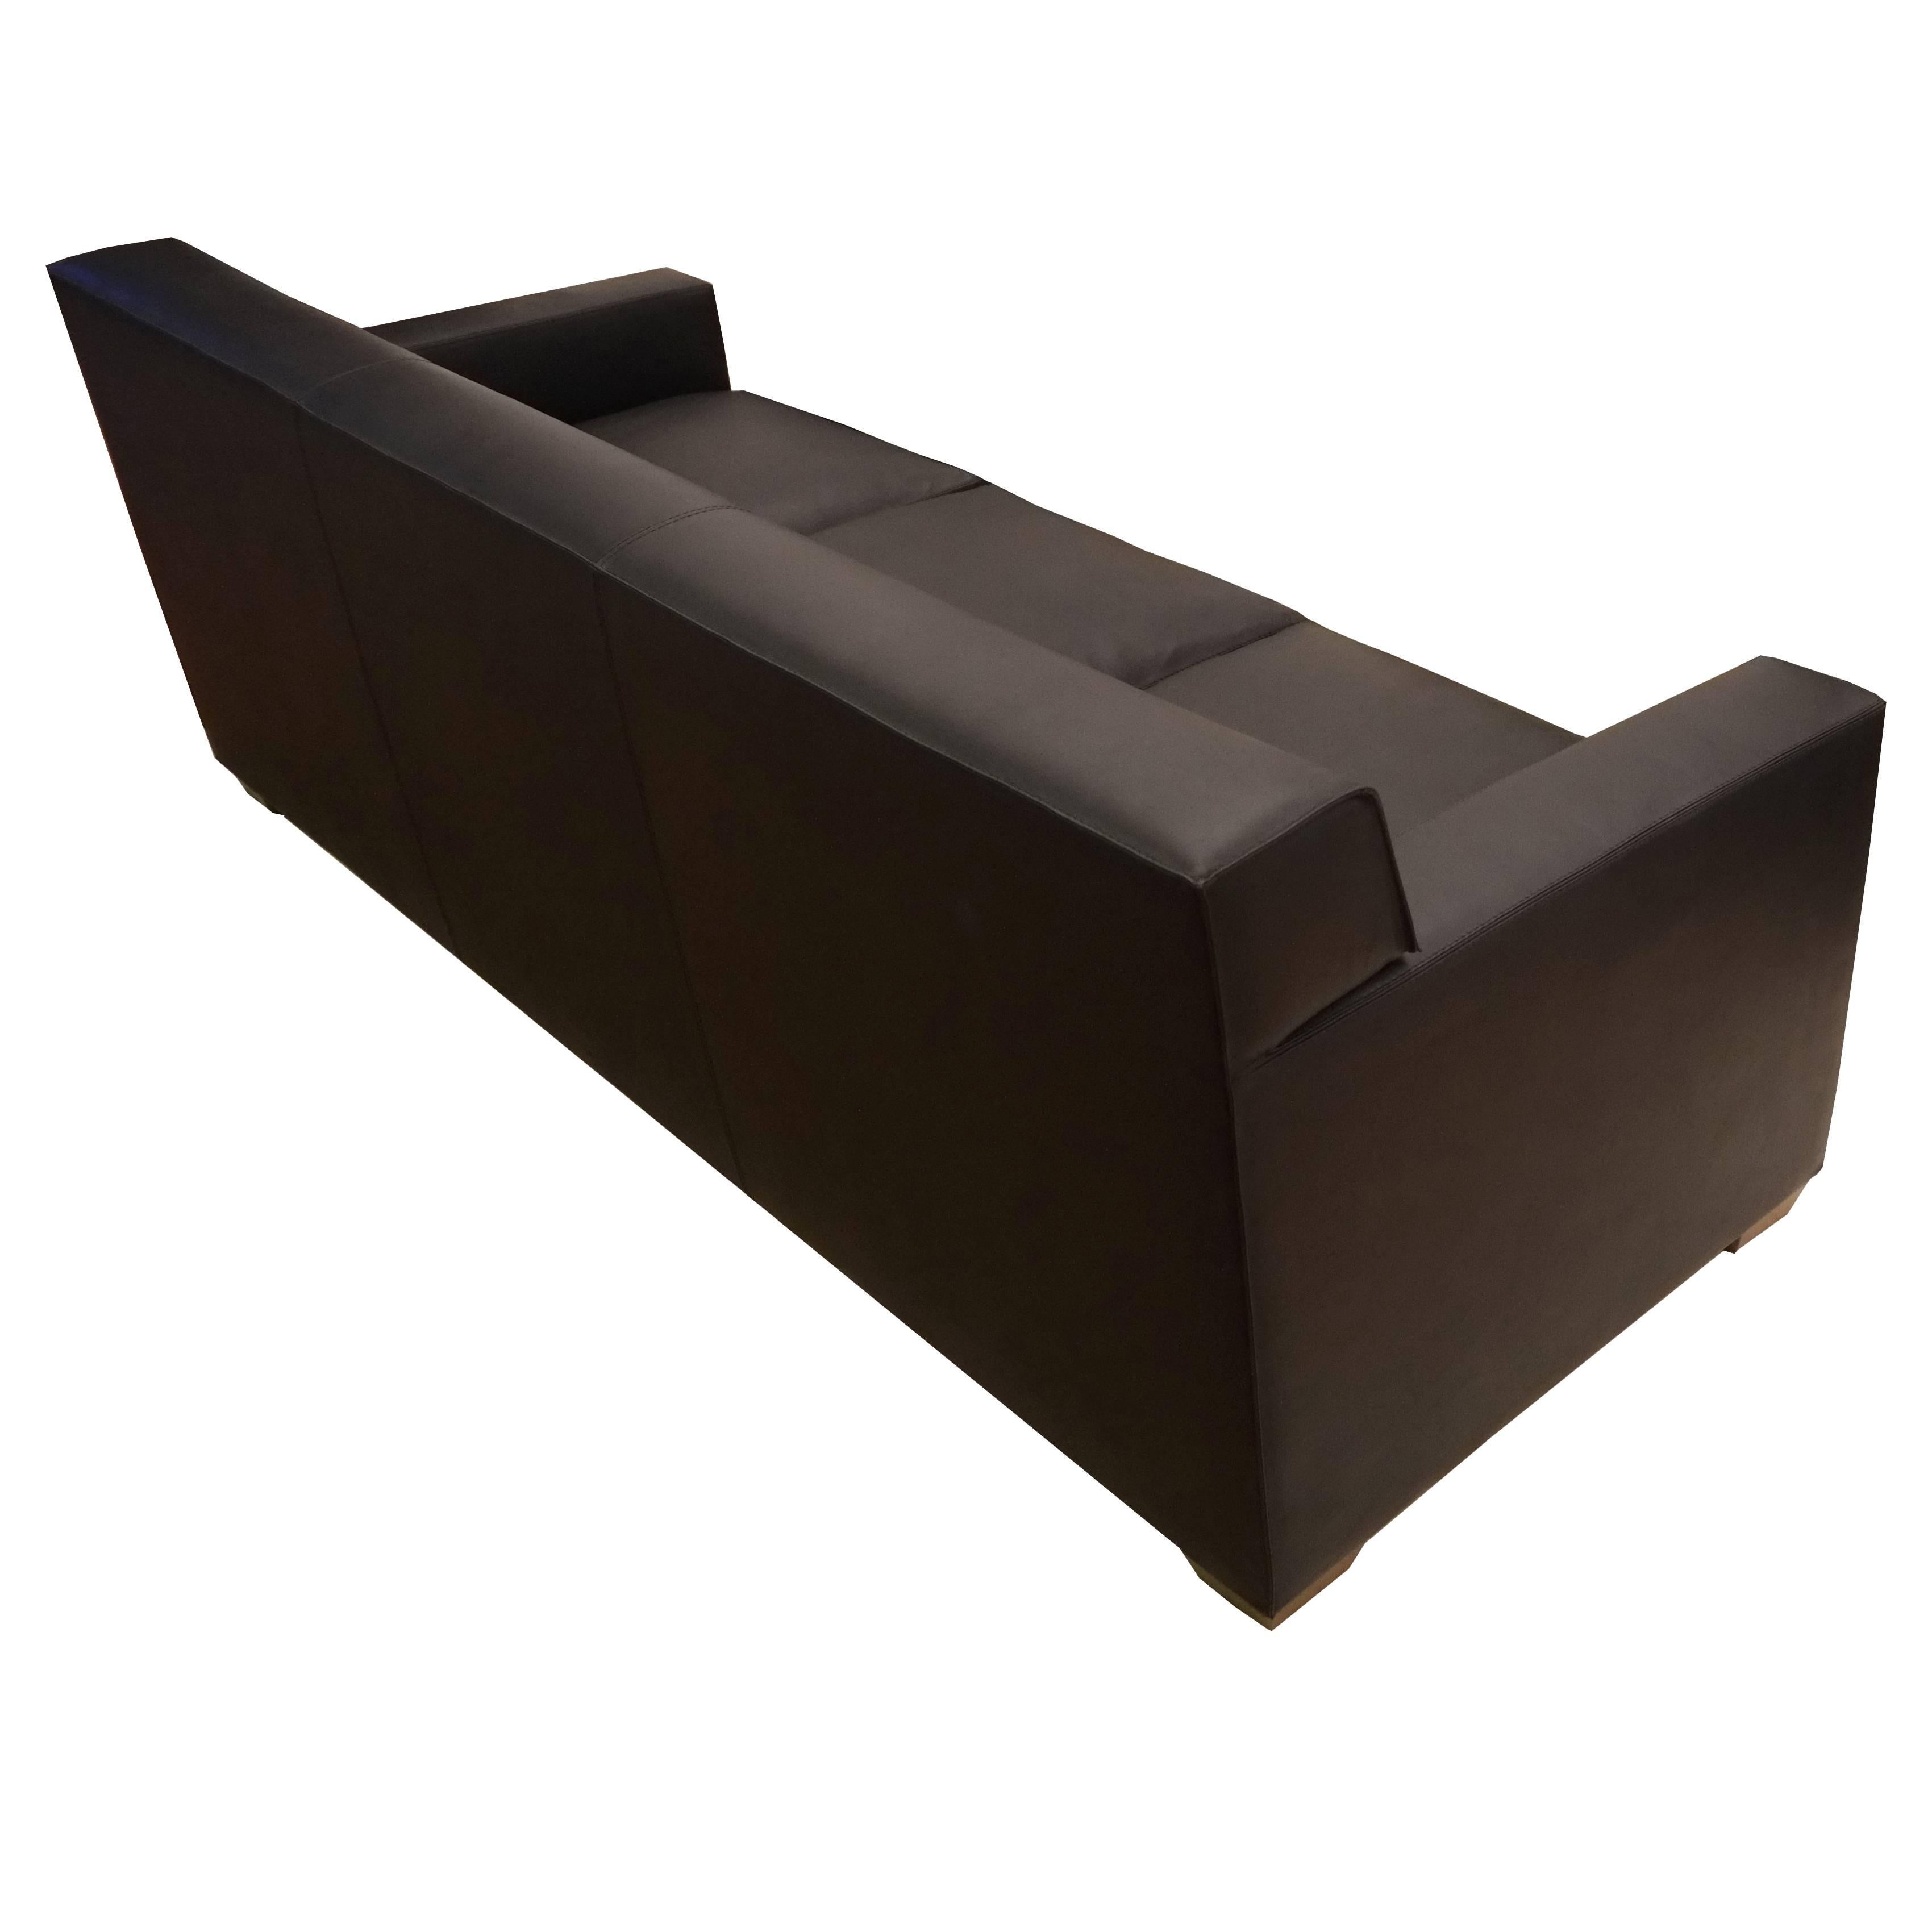 French Jean-Michel Frank & Hermès, a Black Leather Sofa, 21st Century For Sale